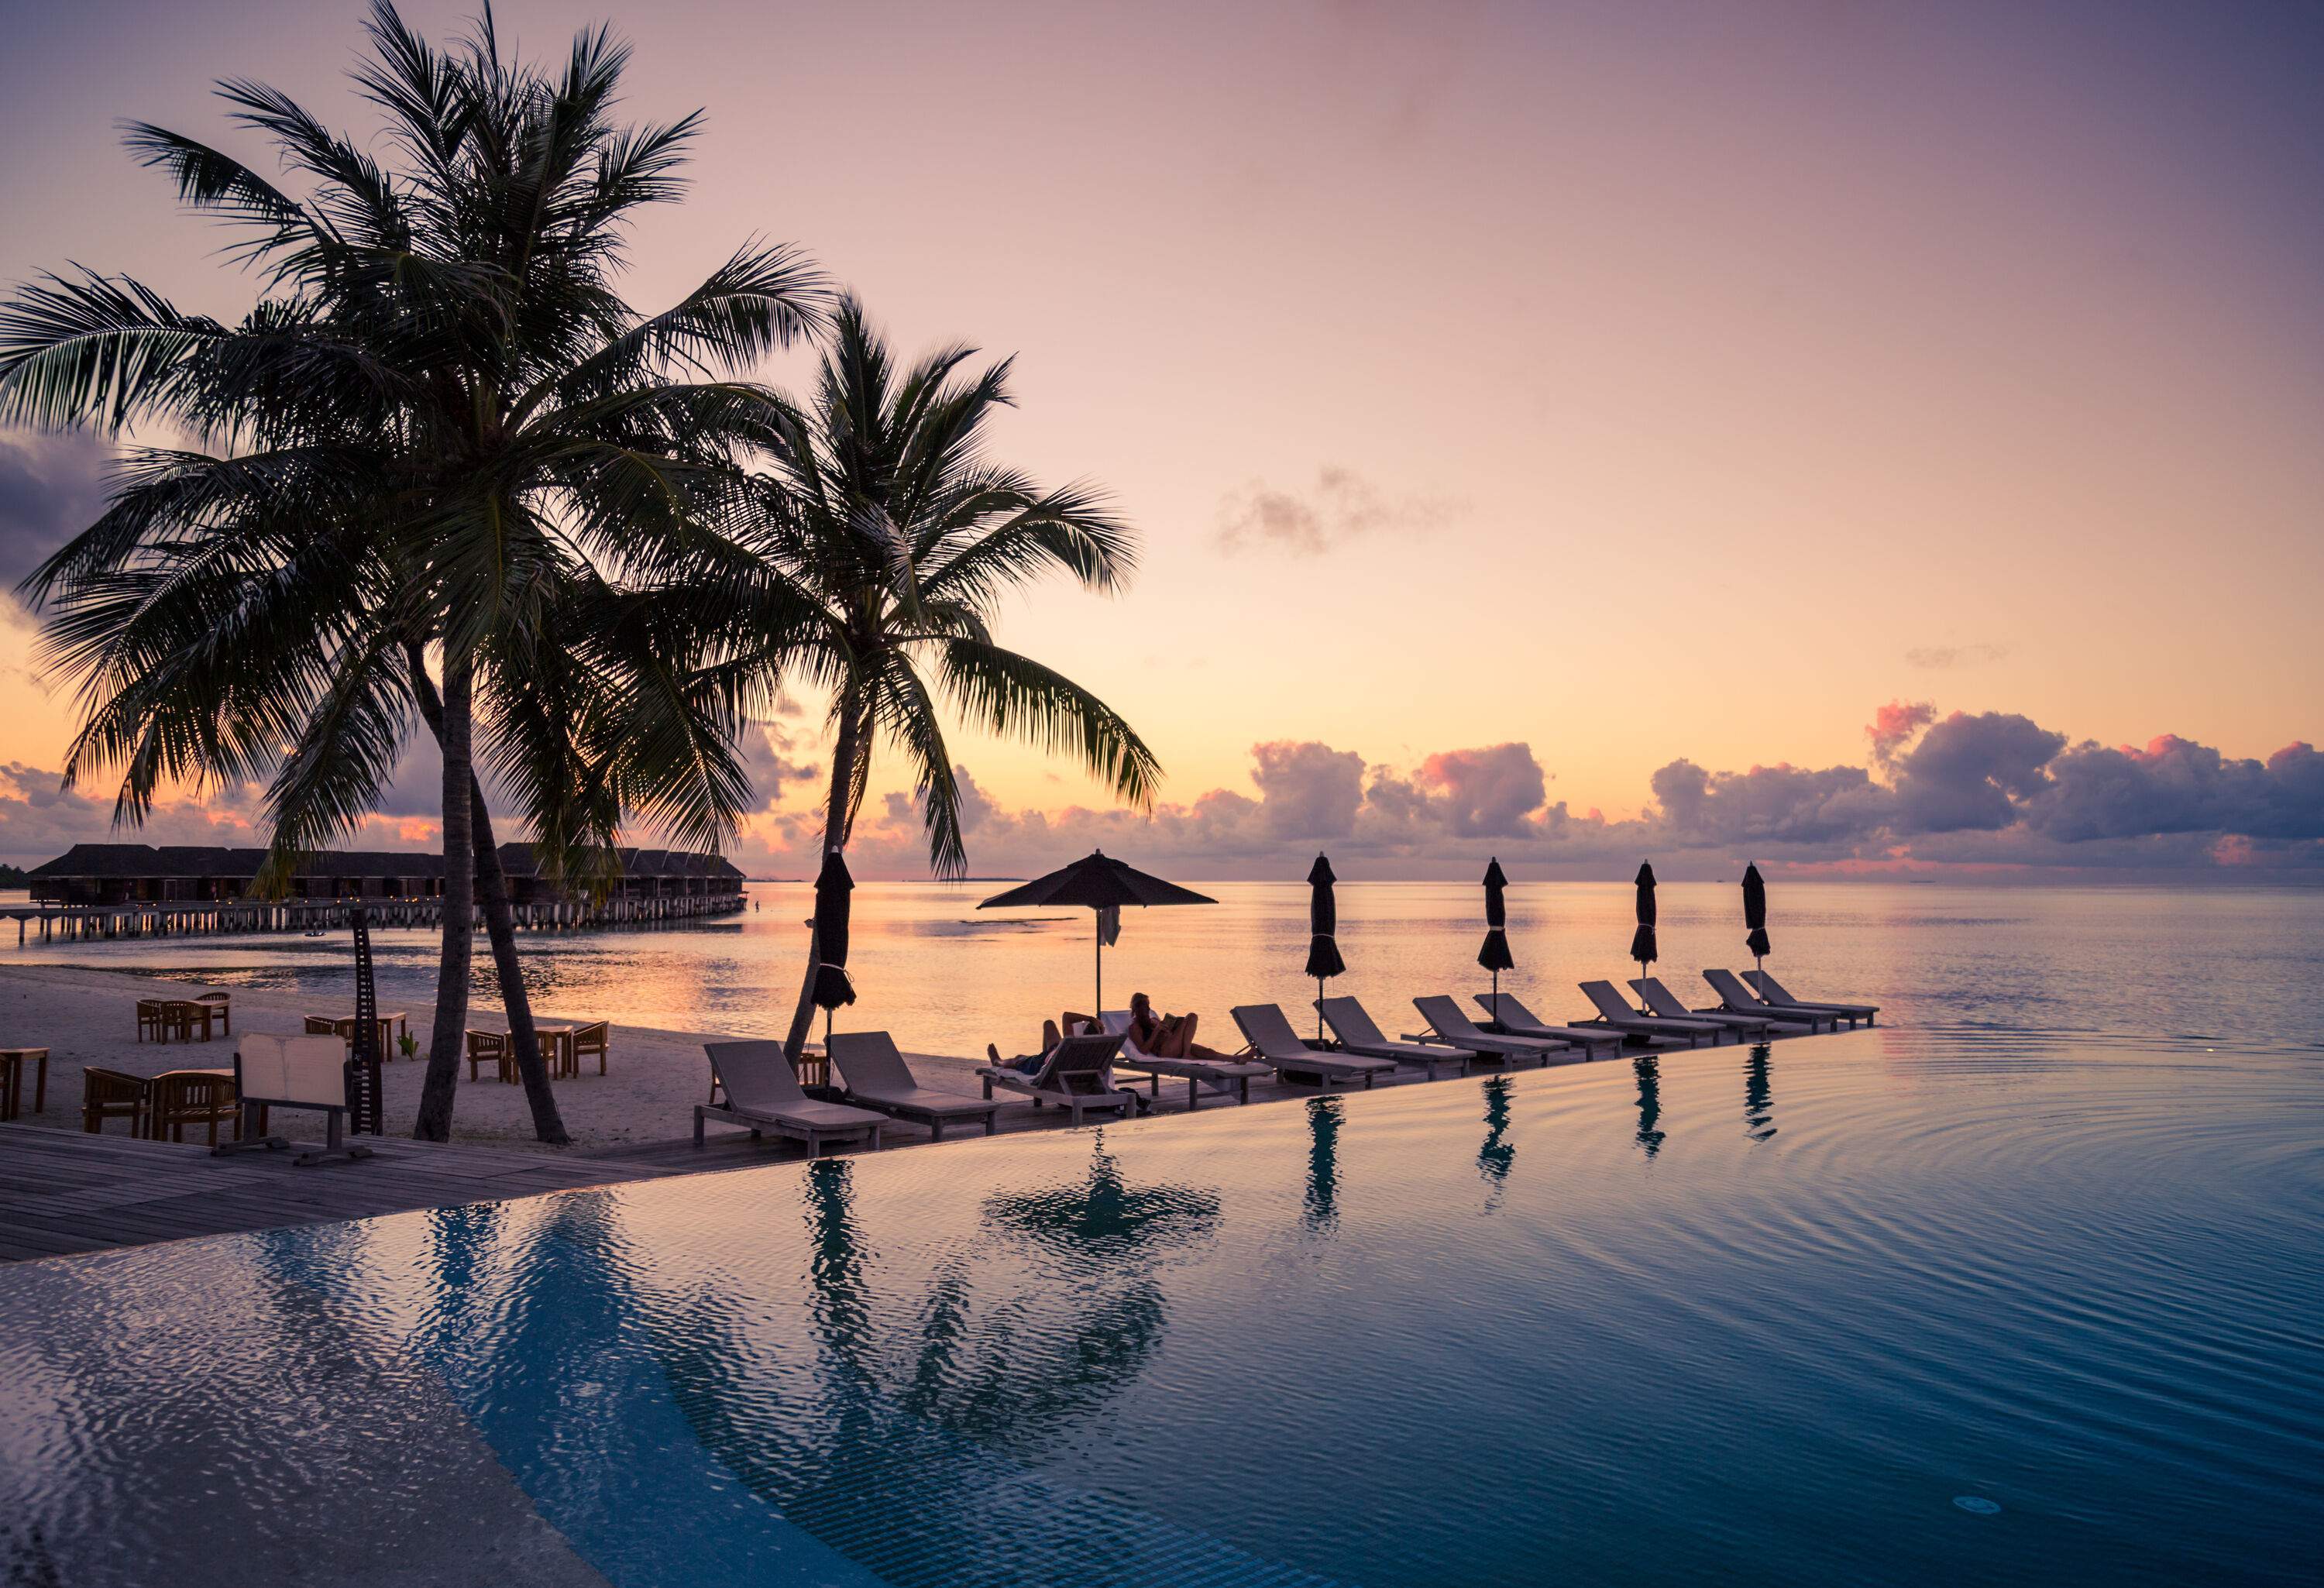 A couple relaxing on the sunbeds beside the dazzling infinity pool against the tranquil ocean on a scenic sunset.